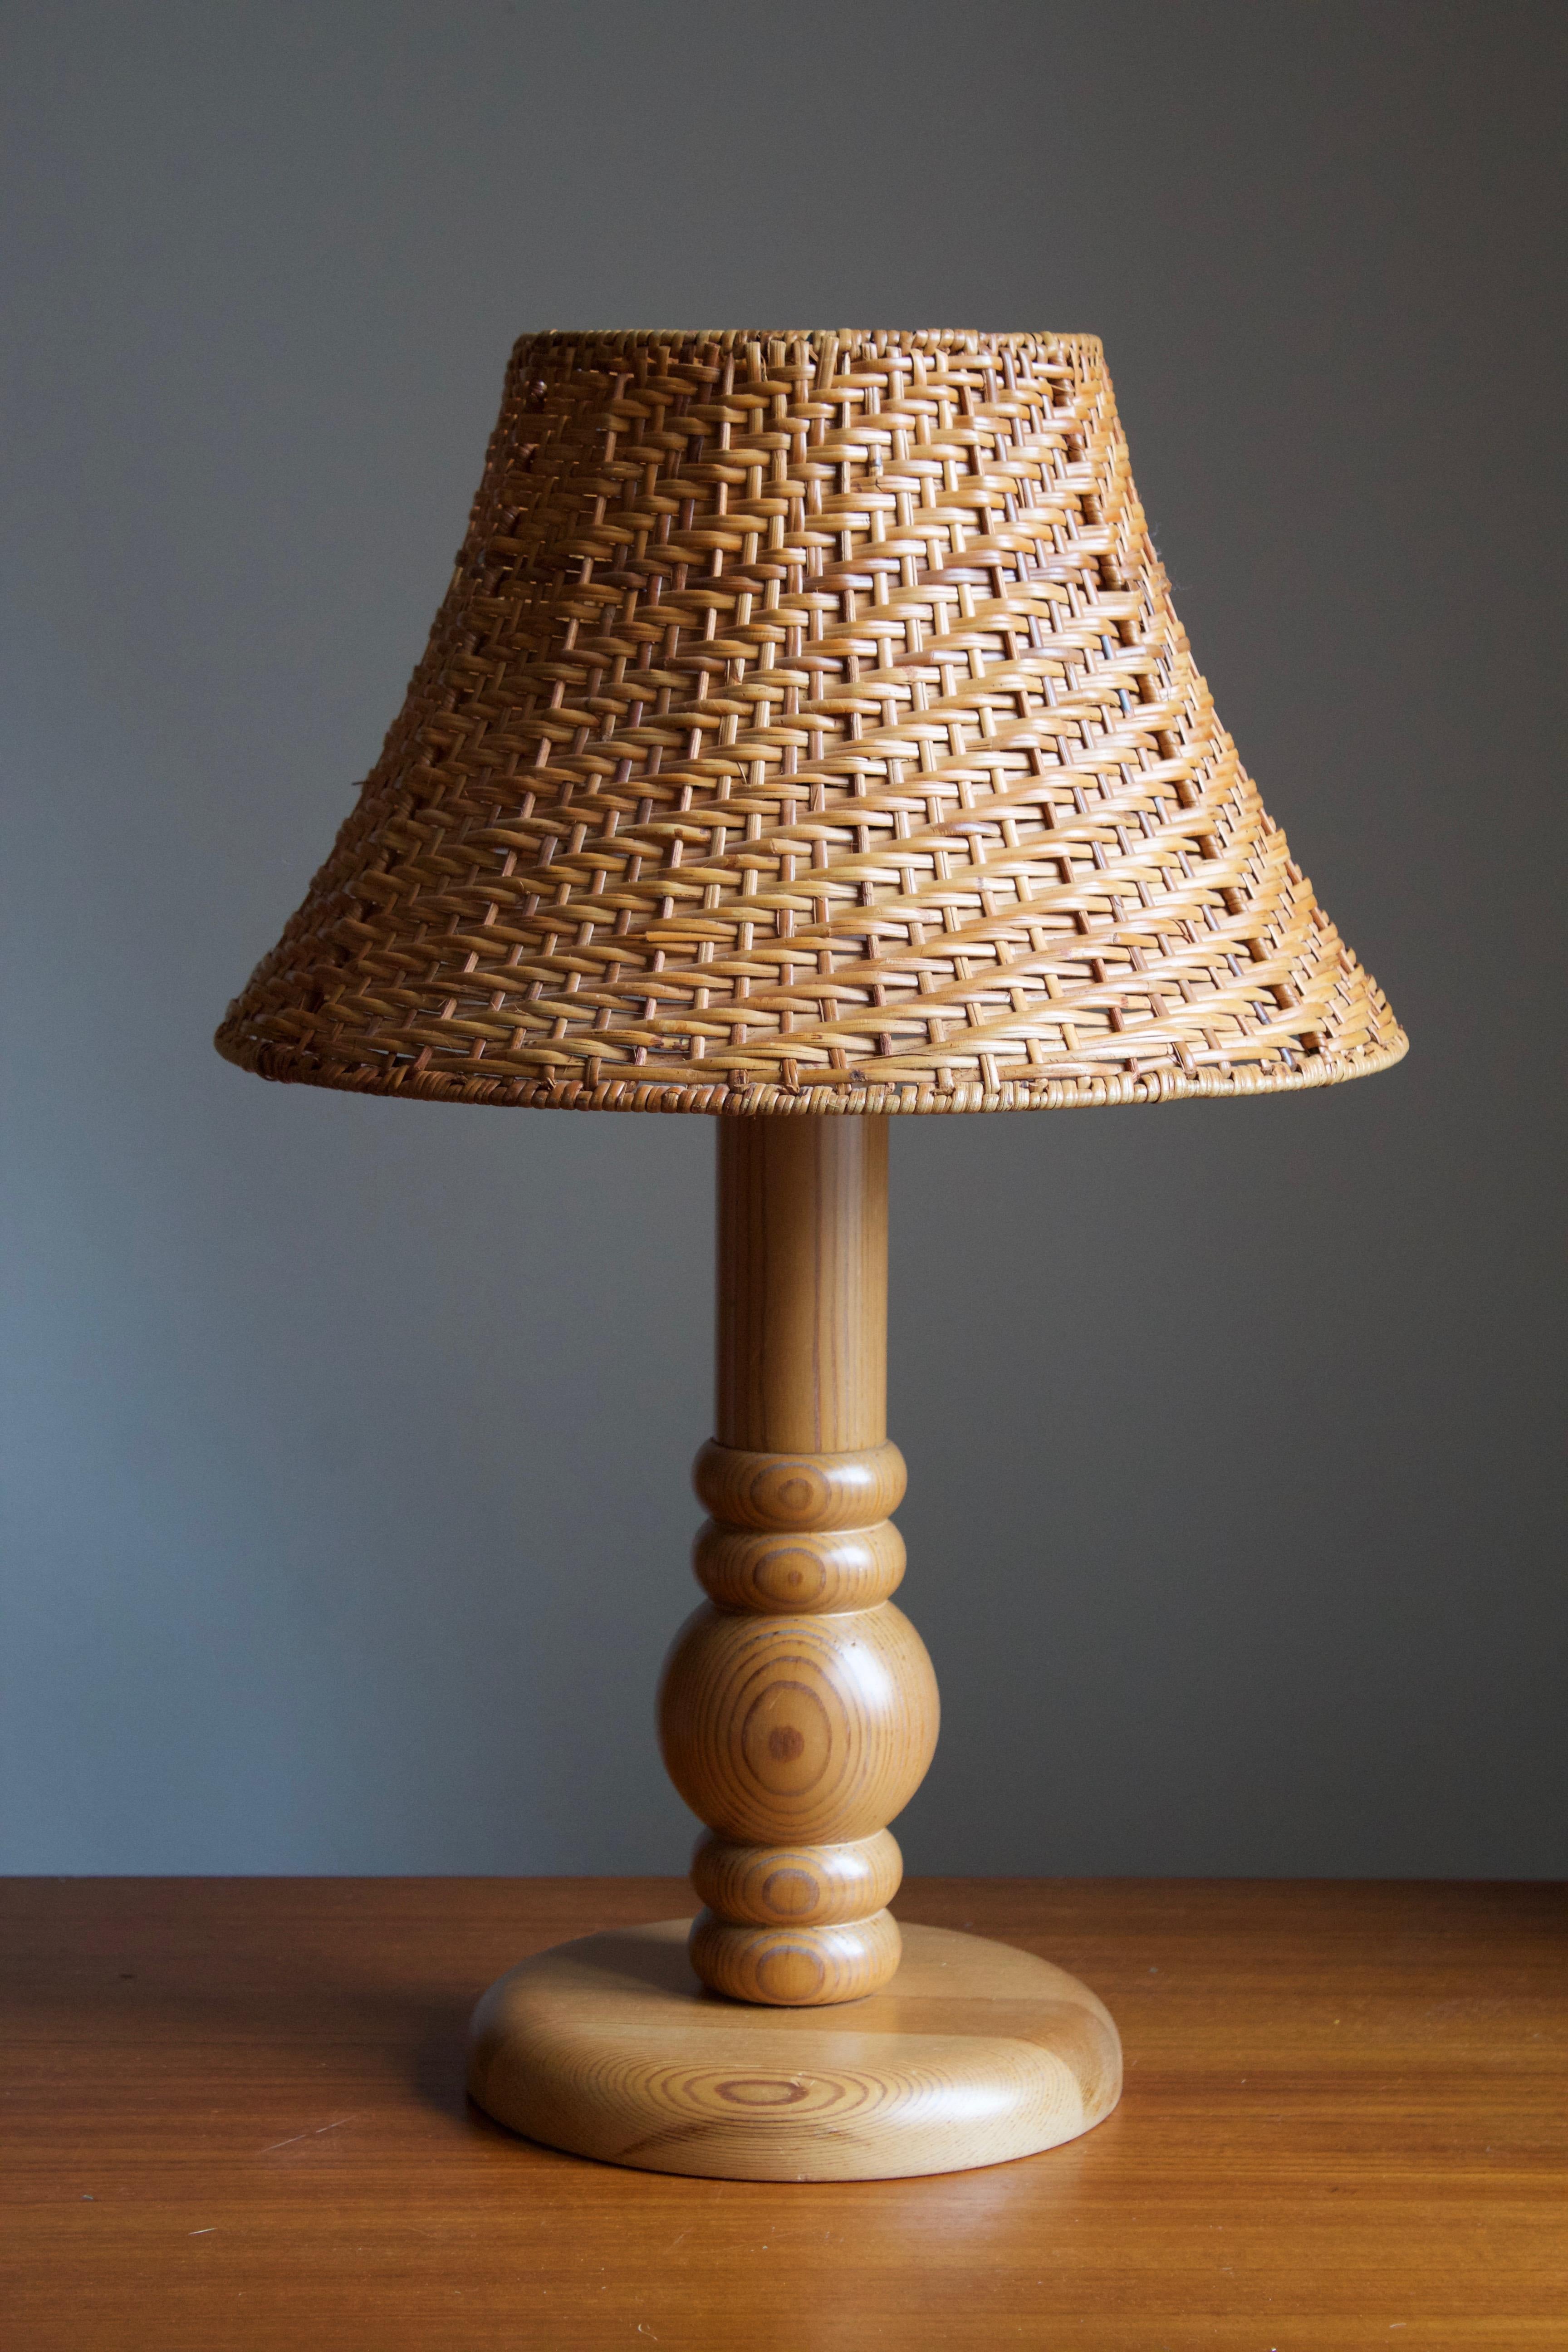 A table lamp designed and produced in Sweden, 1970s. In solid pine. Assorted vintage rattan lampshade.

Stated dimensions exlude lampshade, height includes socket. Upon request a vintage rattan lampshade of model illustrated can be included in